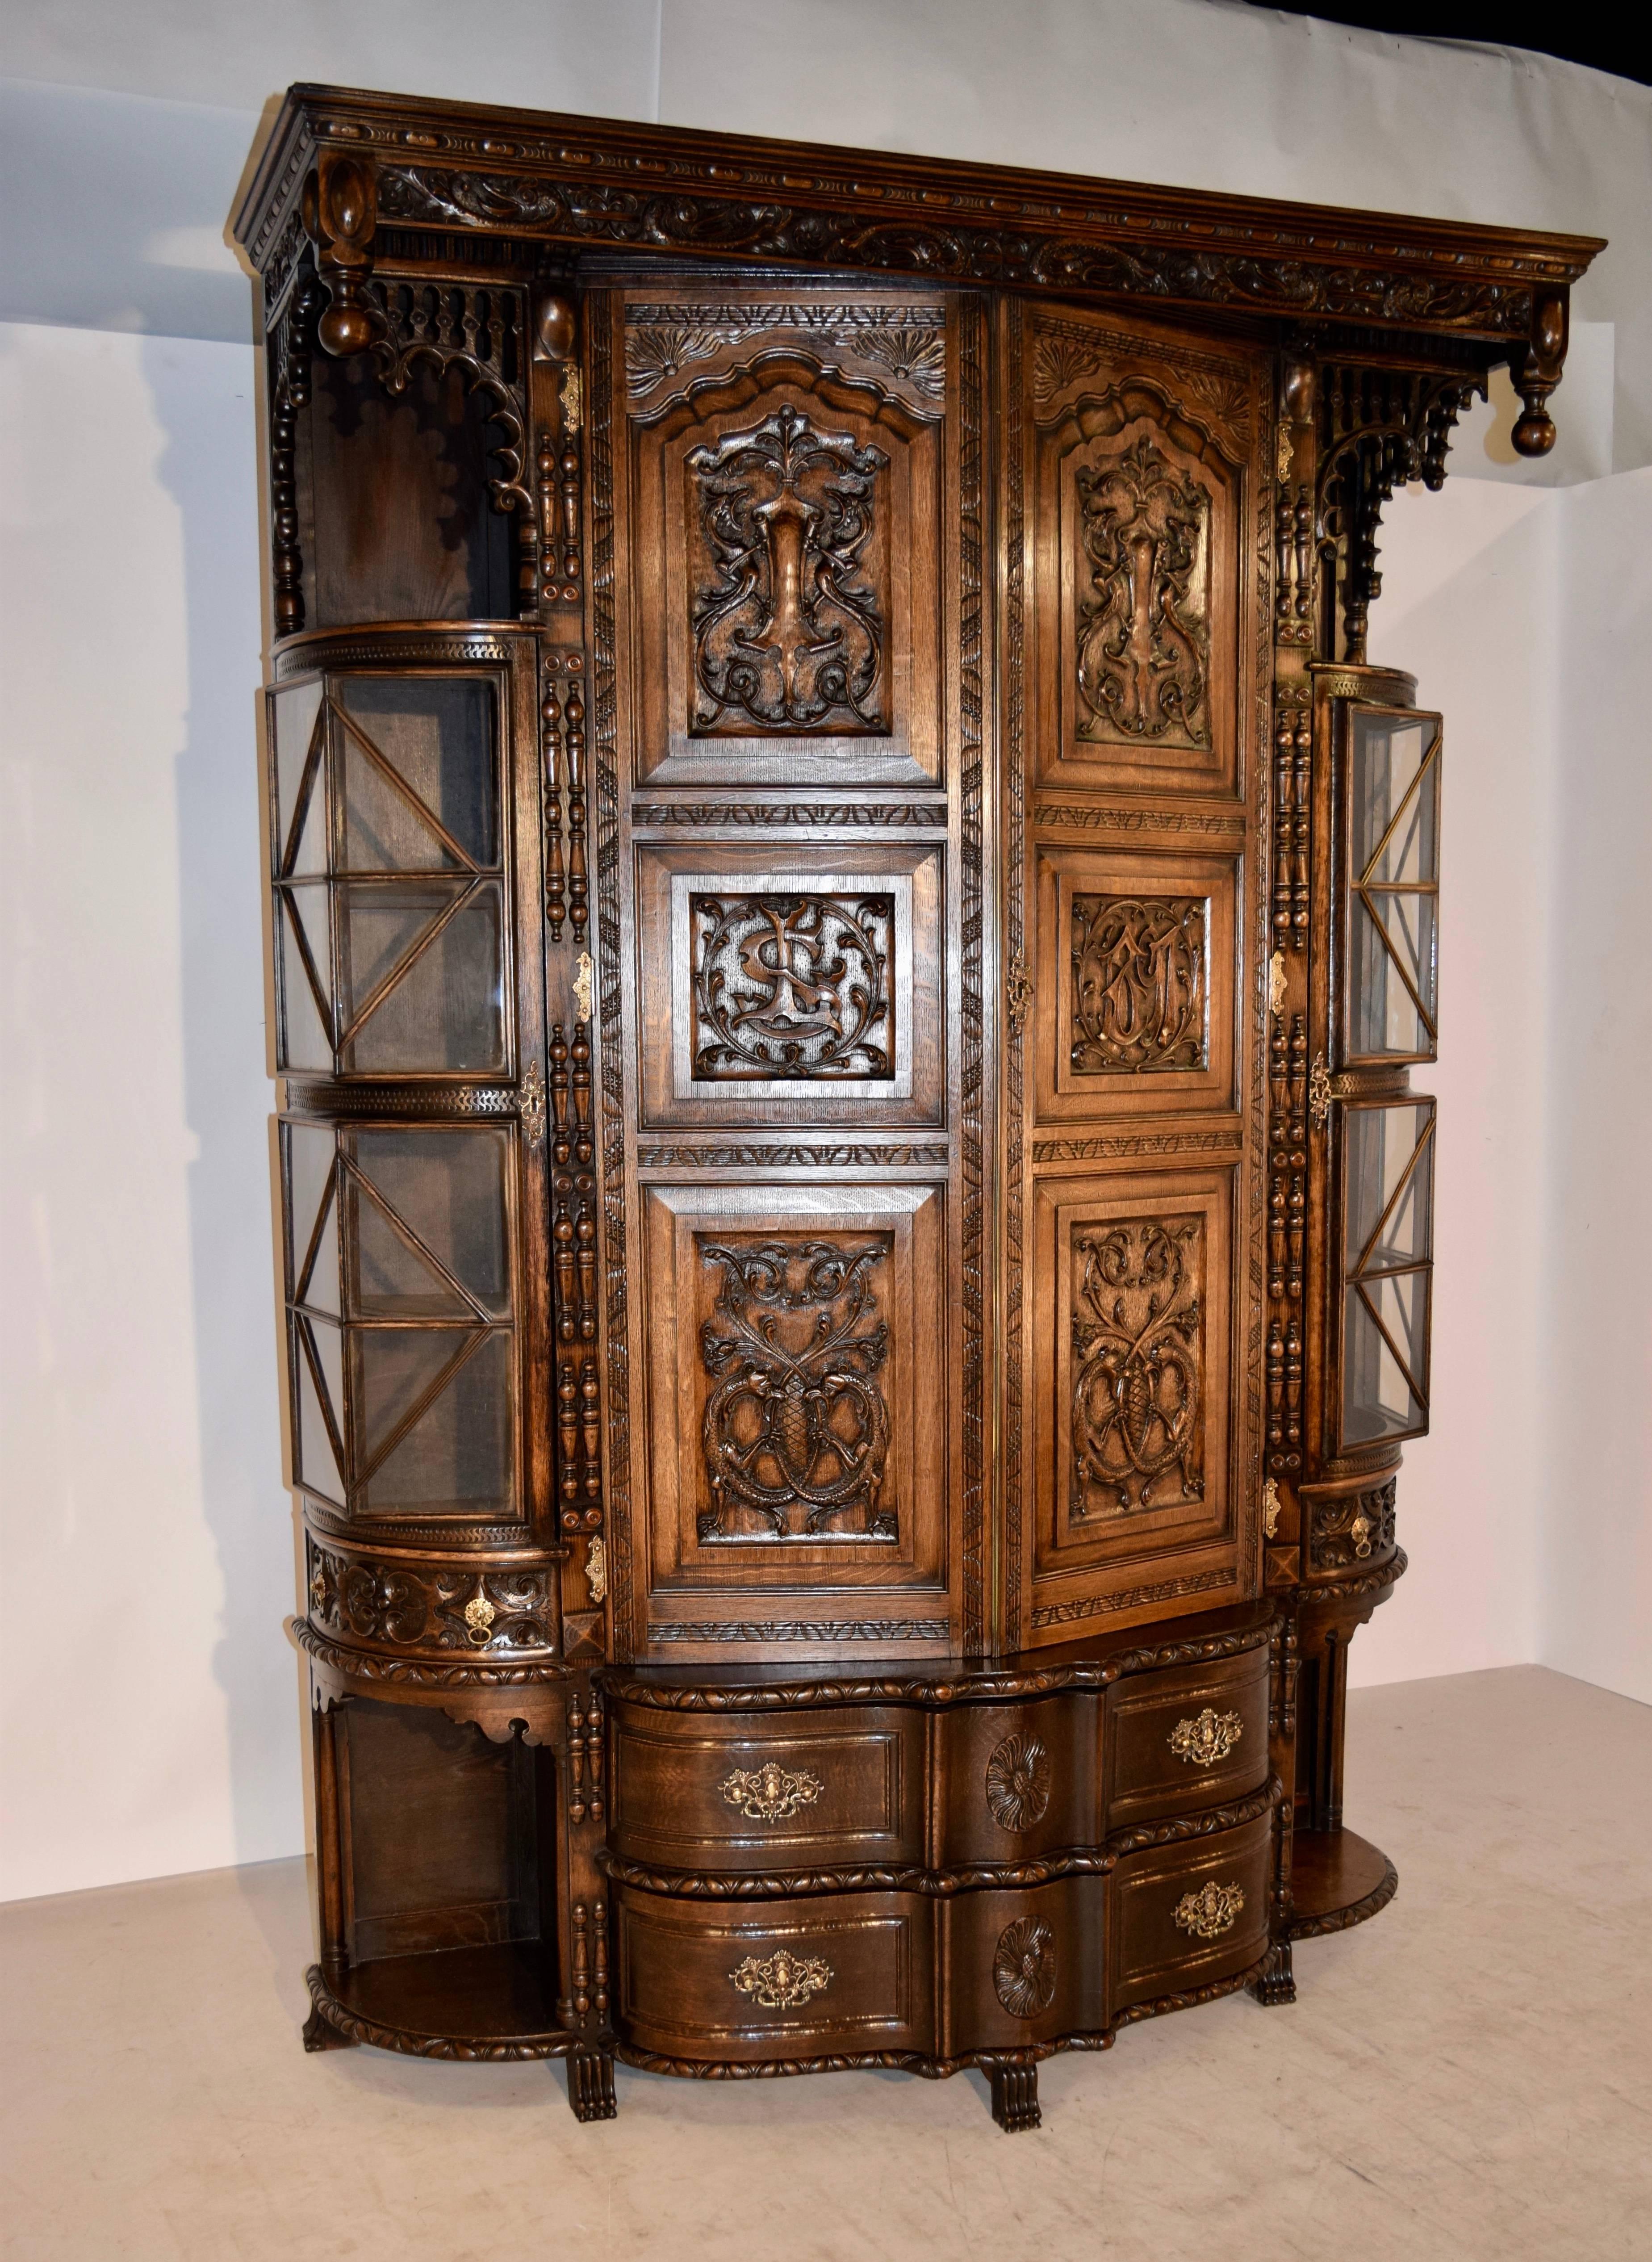 Late 19th century English cloak cupboard made from oak. This piece is exquisitely carved in detail. The crown is molded with egg and dart detail and wonderfully carved dolphins, embellished with hand-turned finials. On the sides, there are Gothic